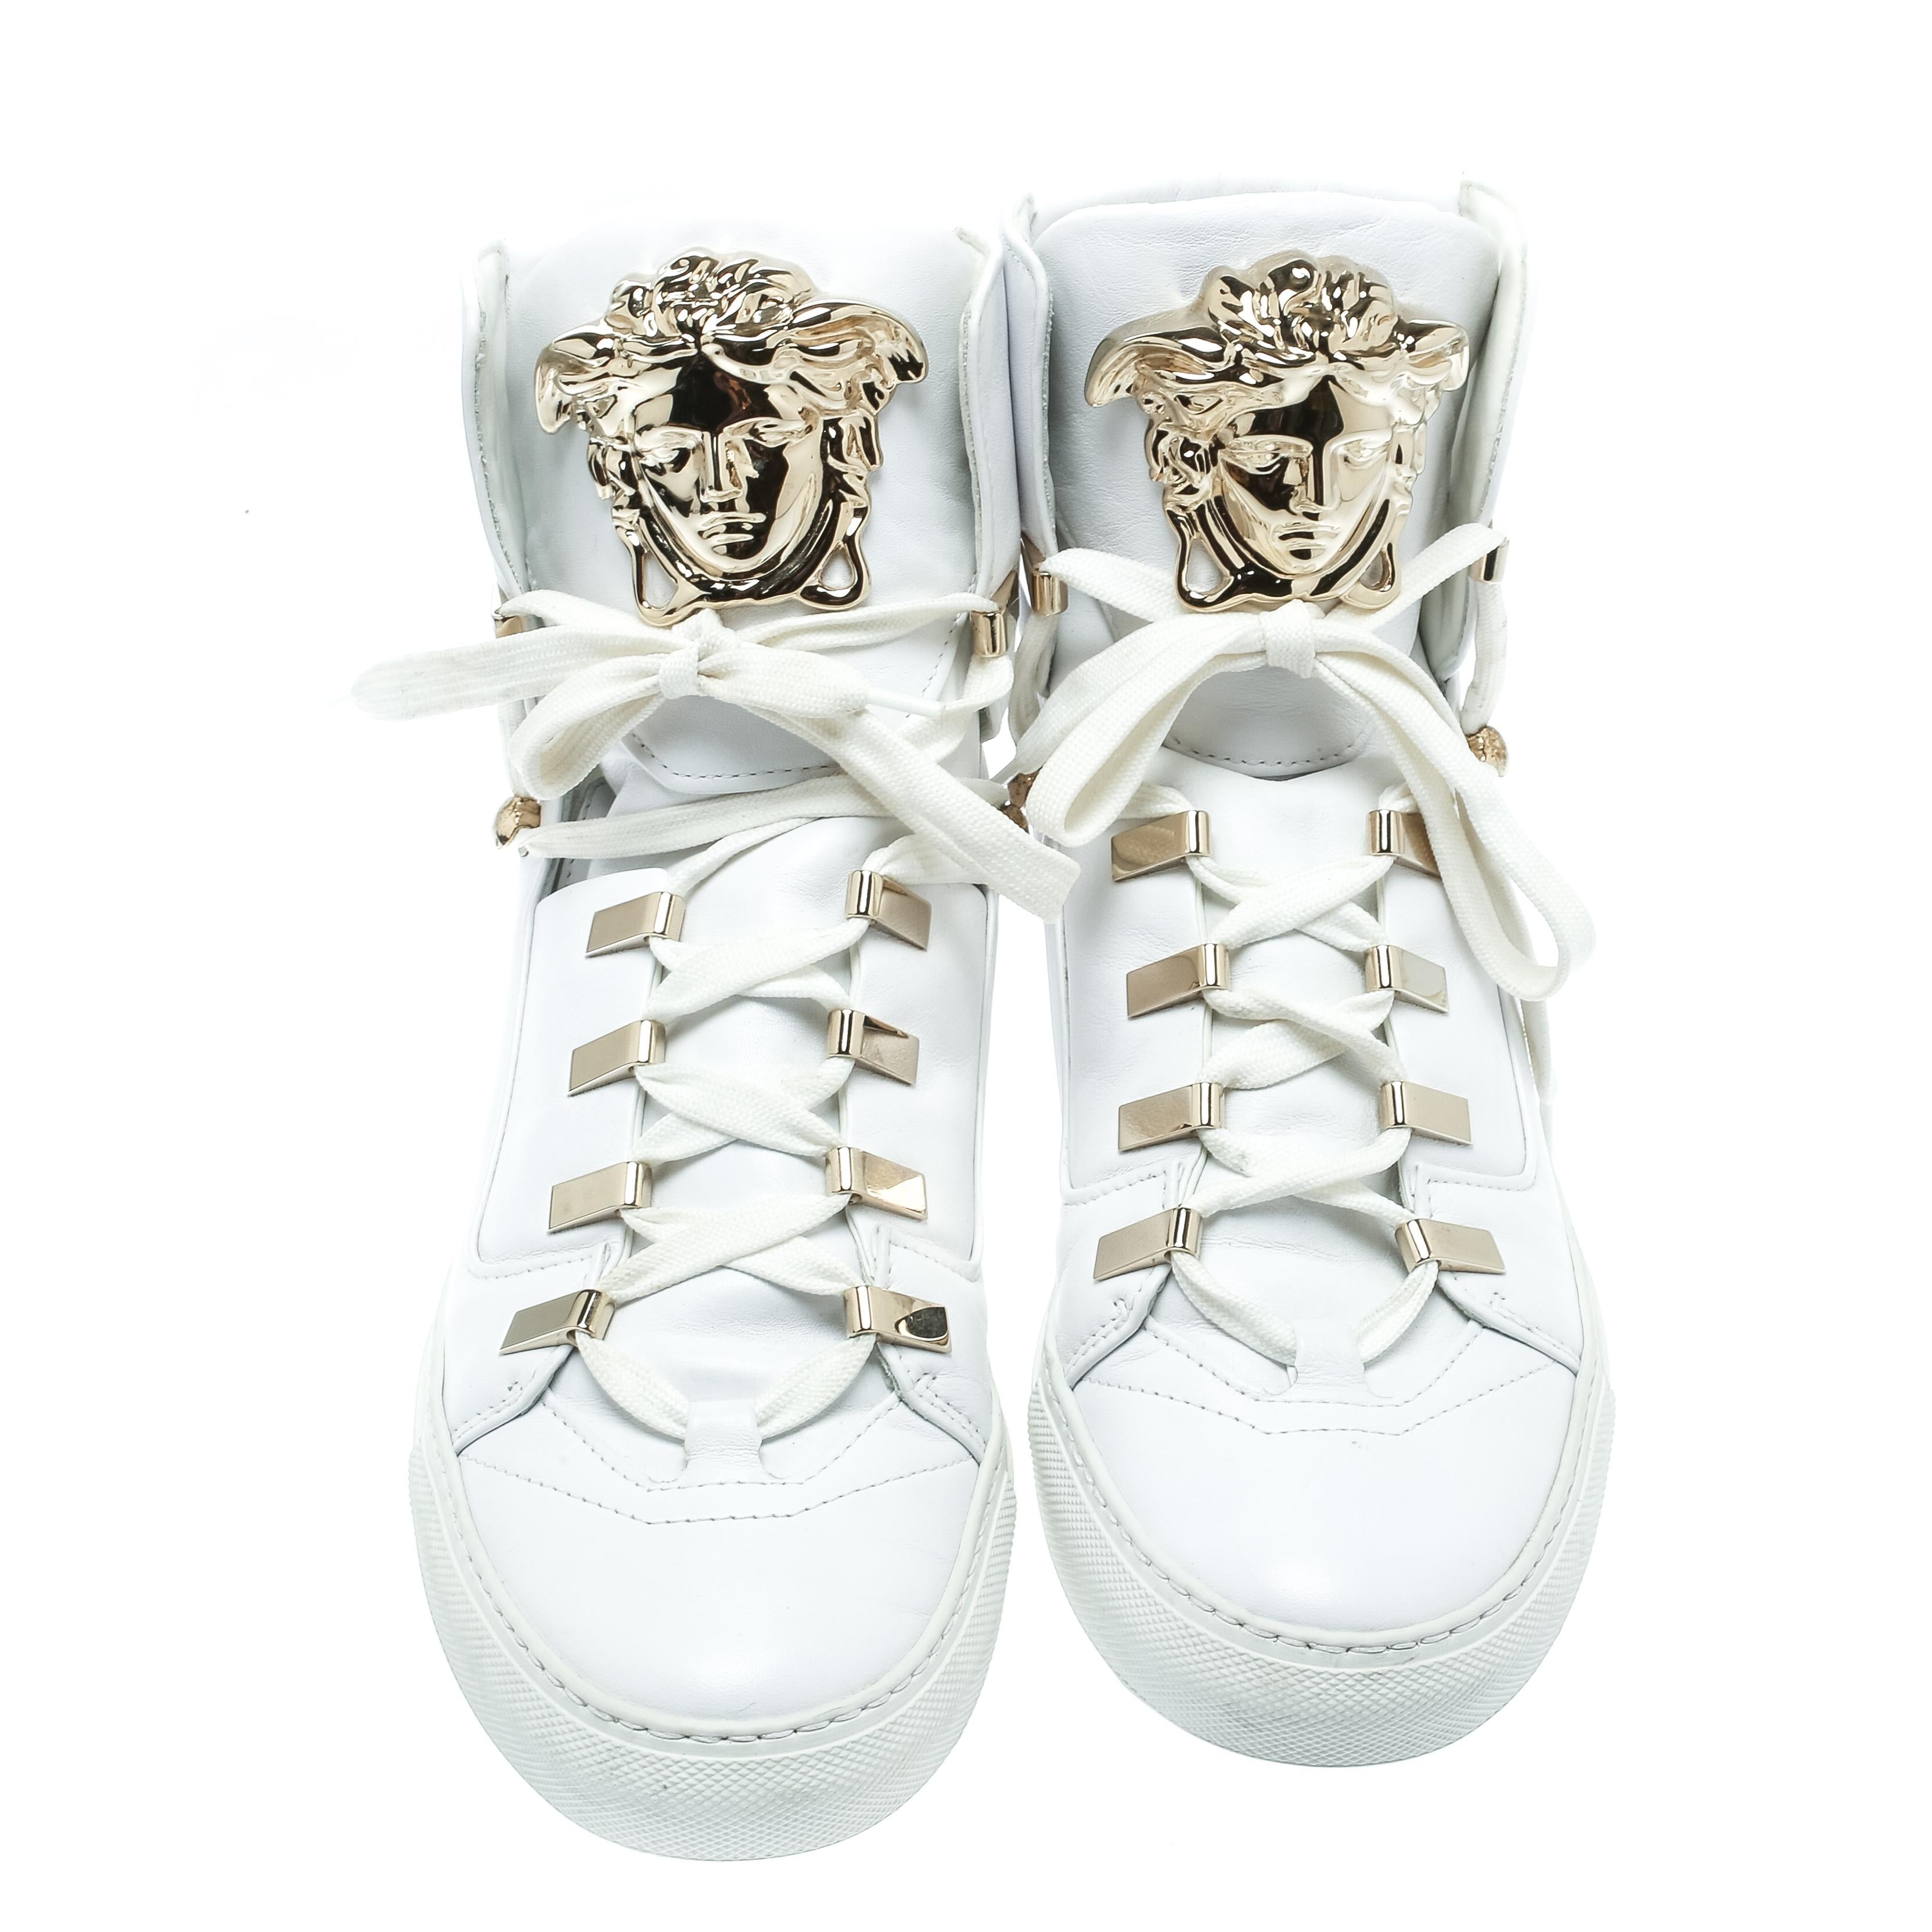 These sneakers from Versace are effortlessly suave and amazingly stylish. Brimming with fabulous details, these white sneakers are crafted from leather into a high-top silhouette and feature a lace-up detailing at the front and gold-tone Medusa logo